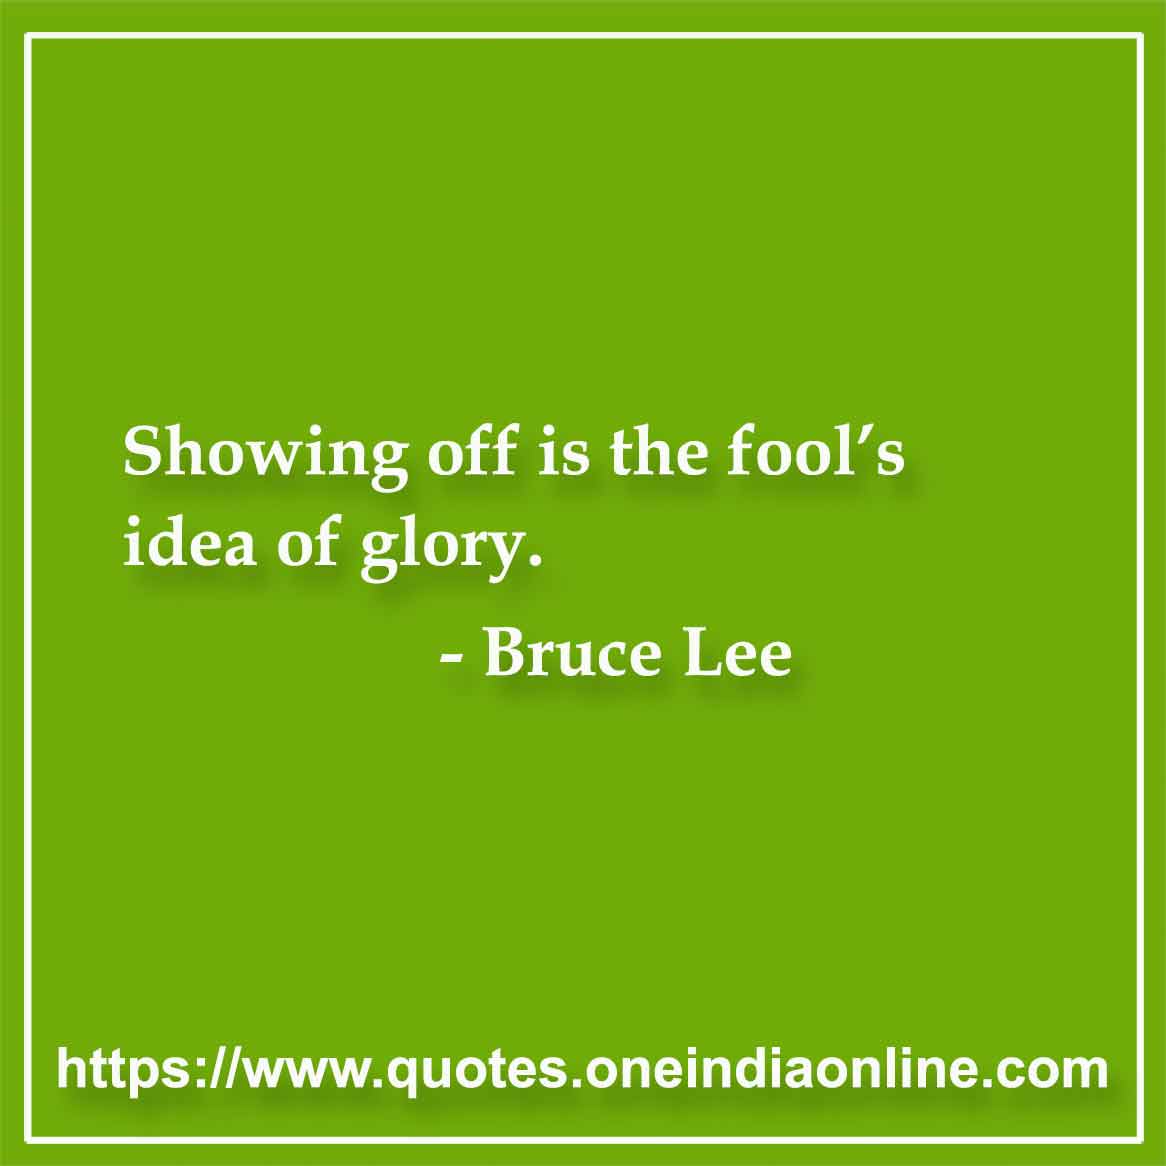 Showing off is the fool’s idea of glory.